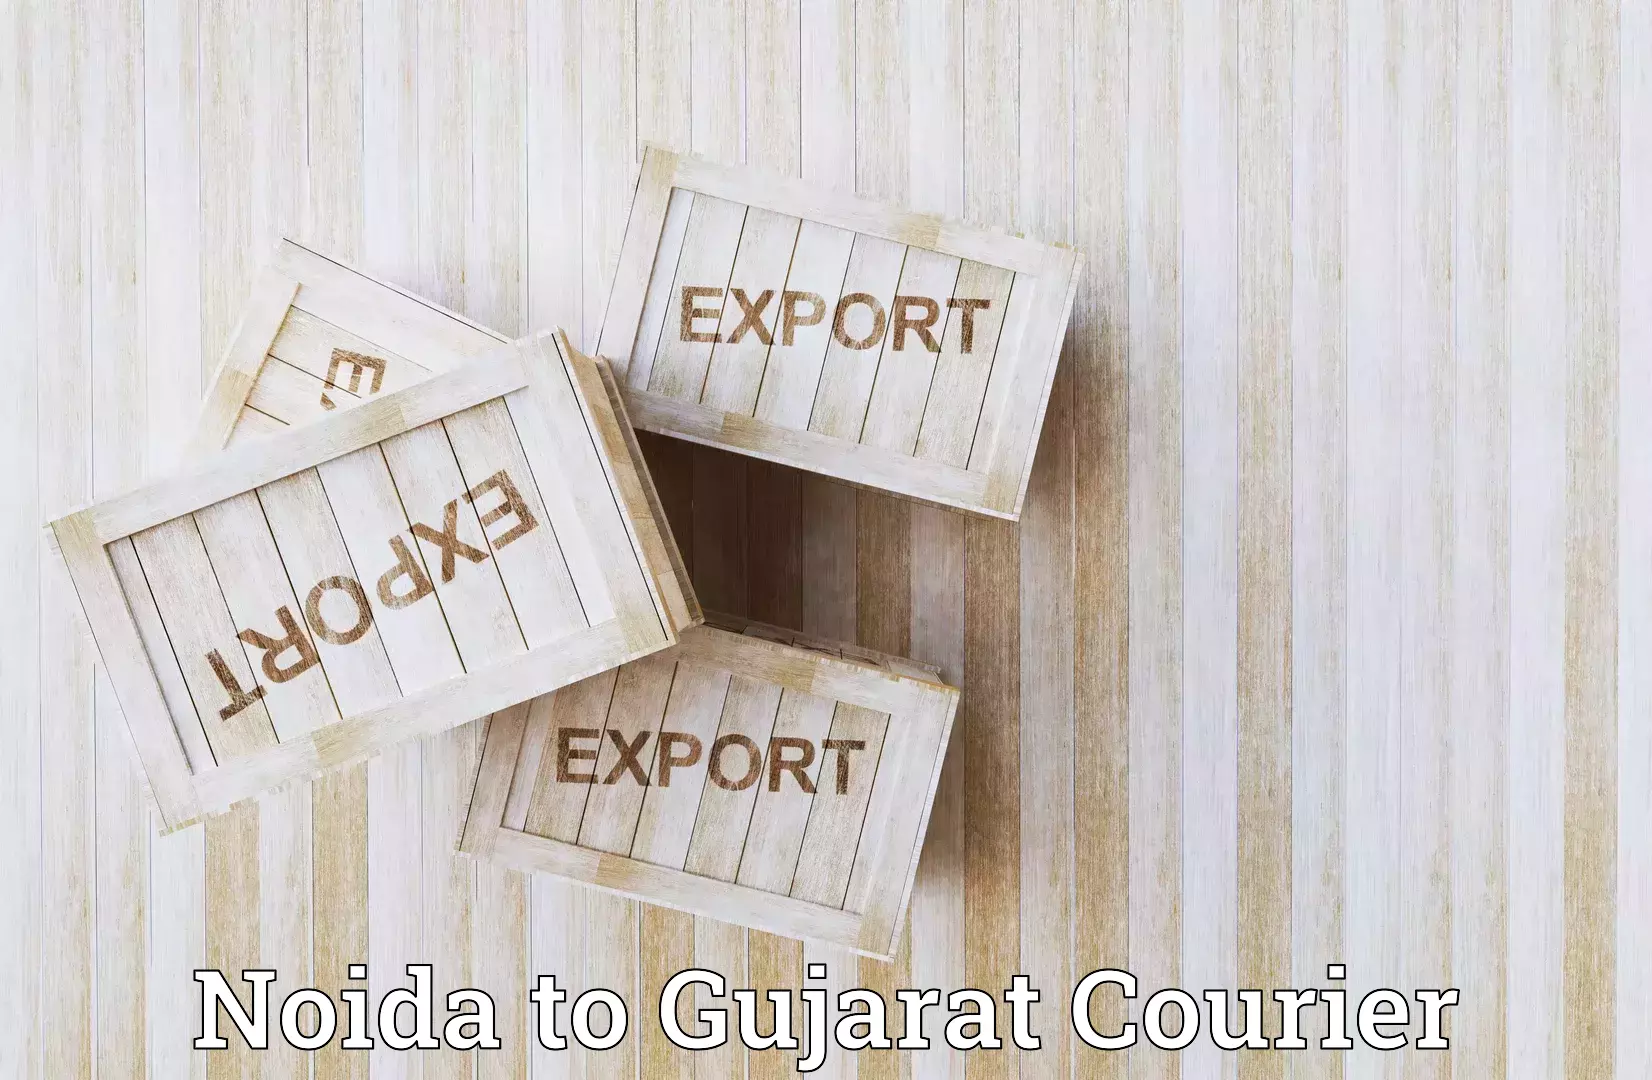 Global shipping networks Noida to Anand